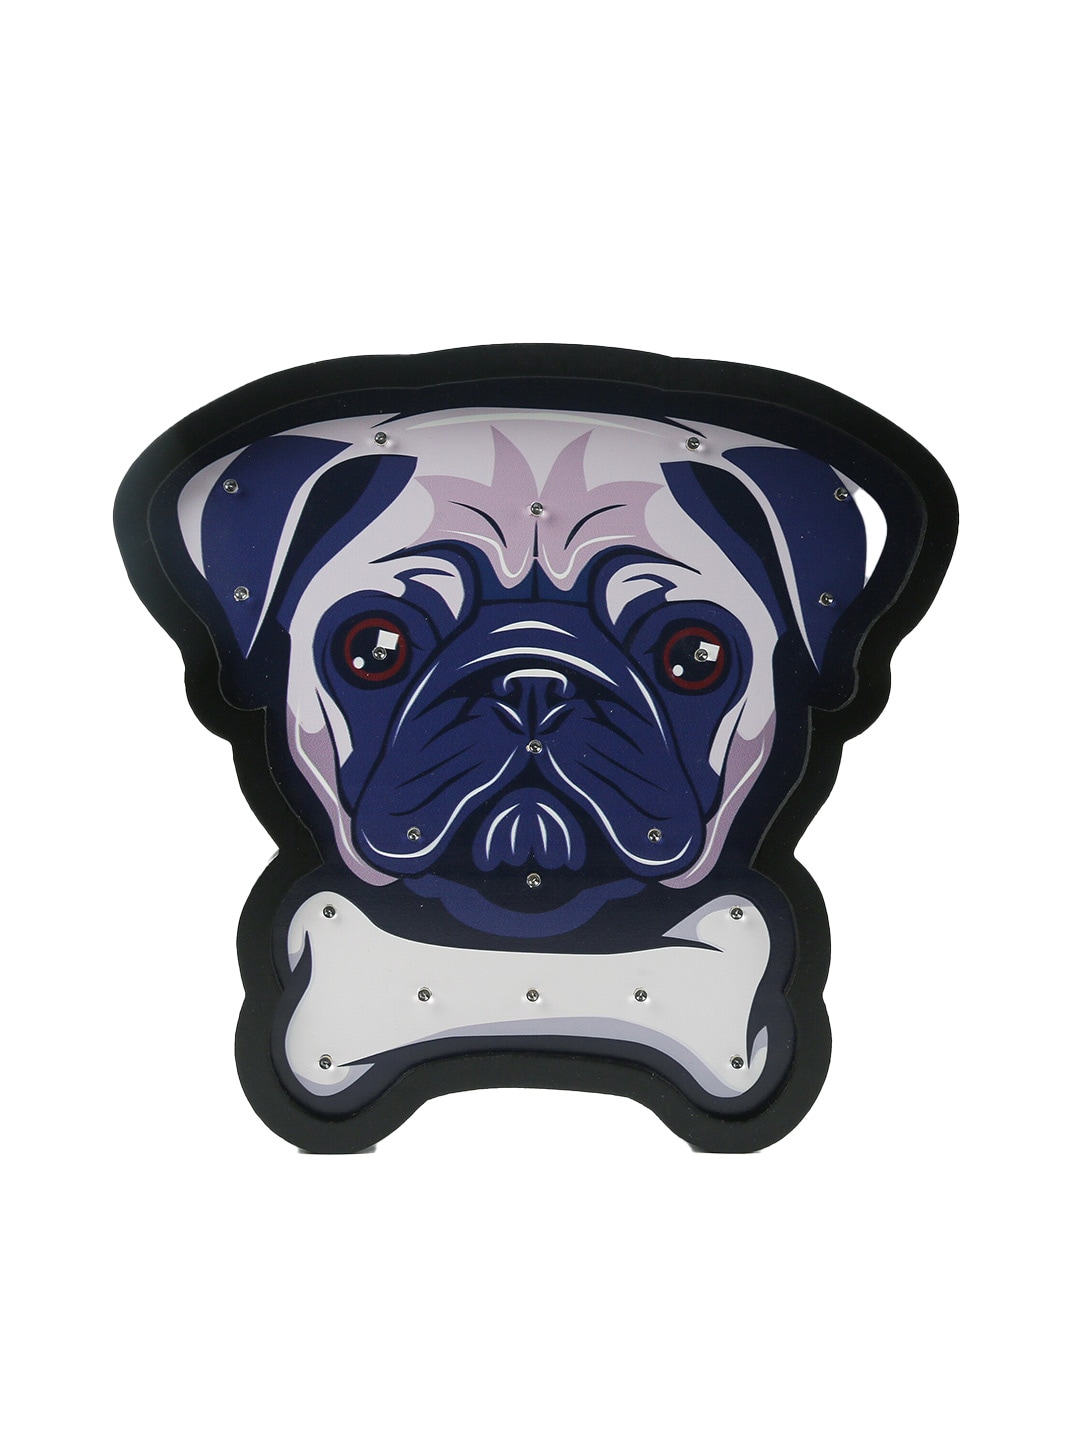 Bigsmall Multicolored Pug Wooden LED Lamp Price in India